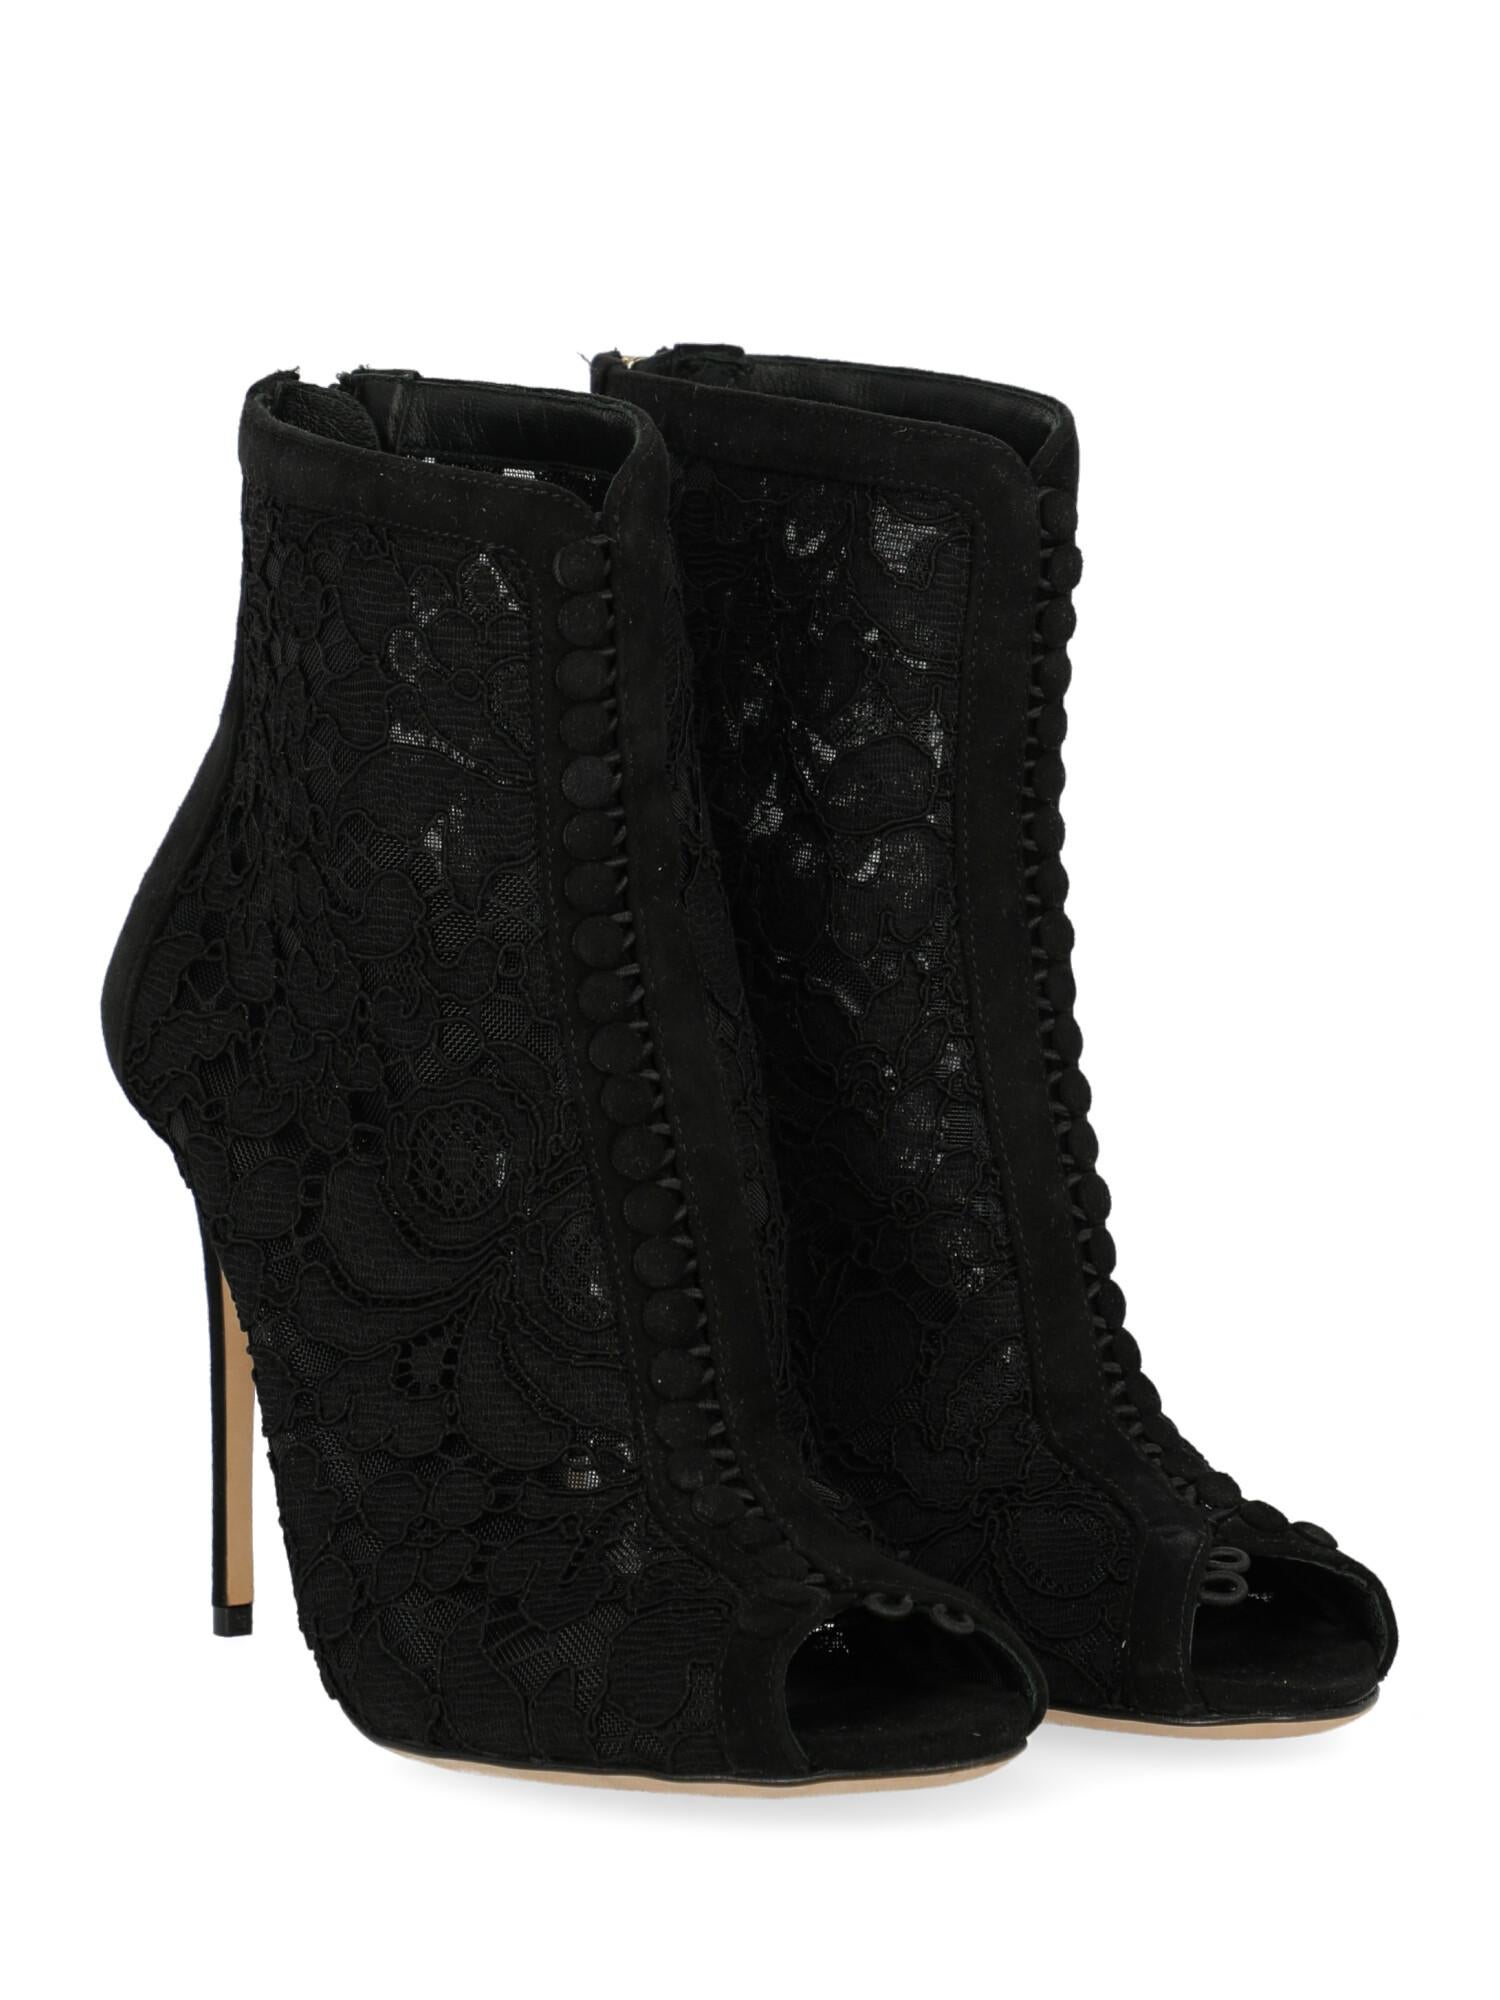 Ankle boots, fabric, other patterns, transparent, lace, suede, back zipper fastening, gold-tone hardware, open toe, stiletto heel, high heel, decorative buttons, covered button. Product Condition: Excellent. Sole: negligible marks. Dustbag: Yes.